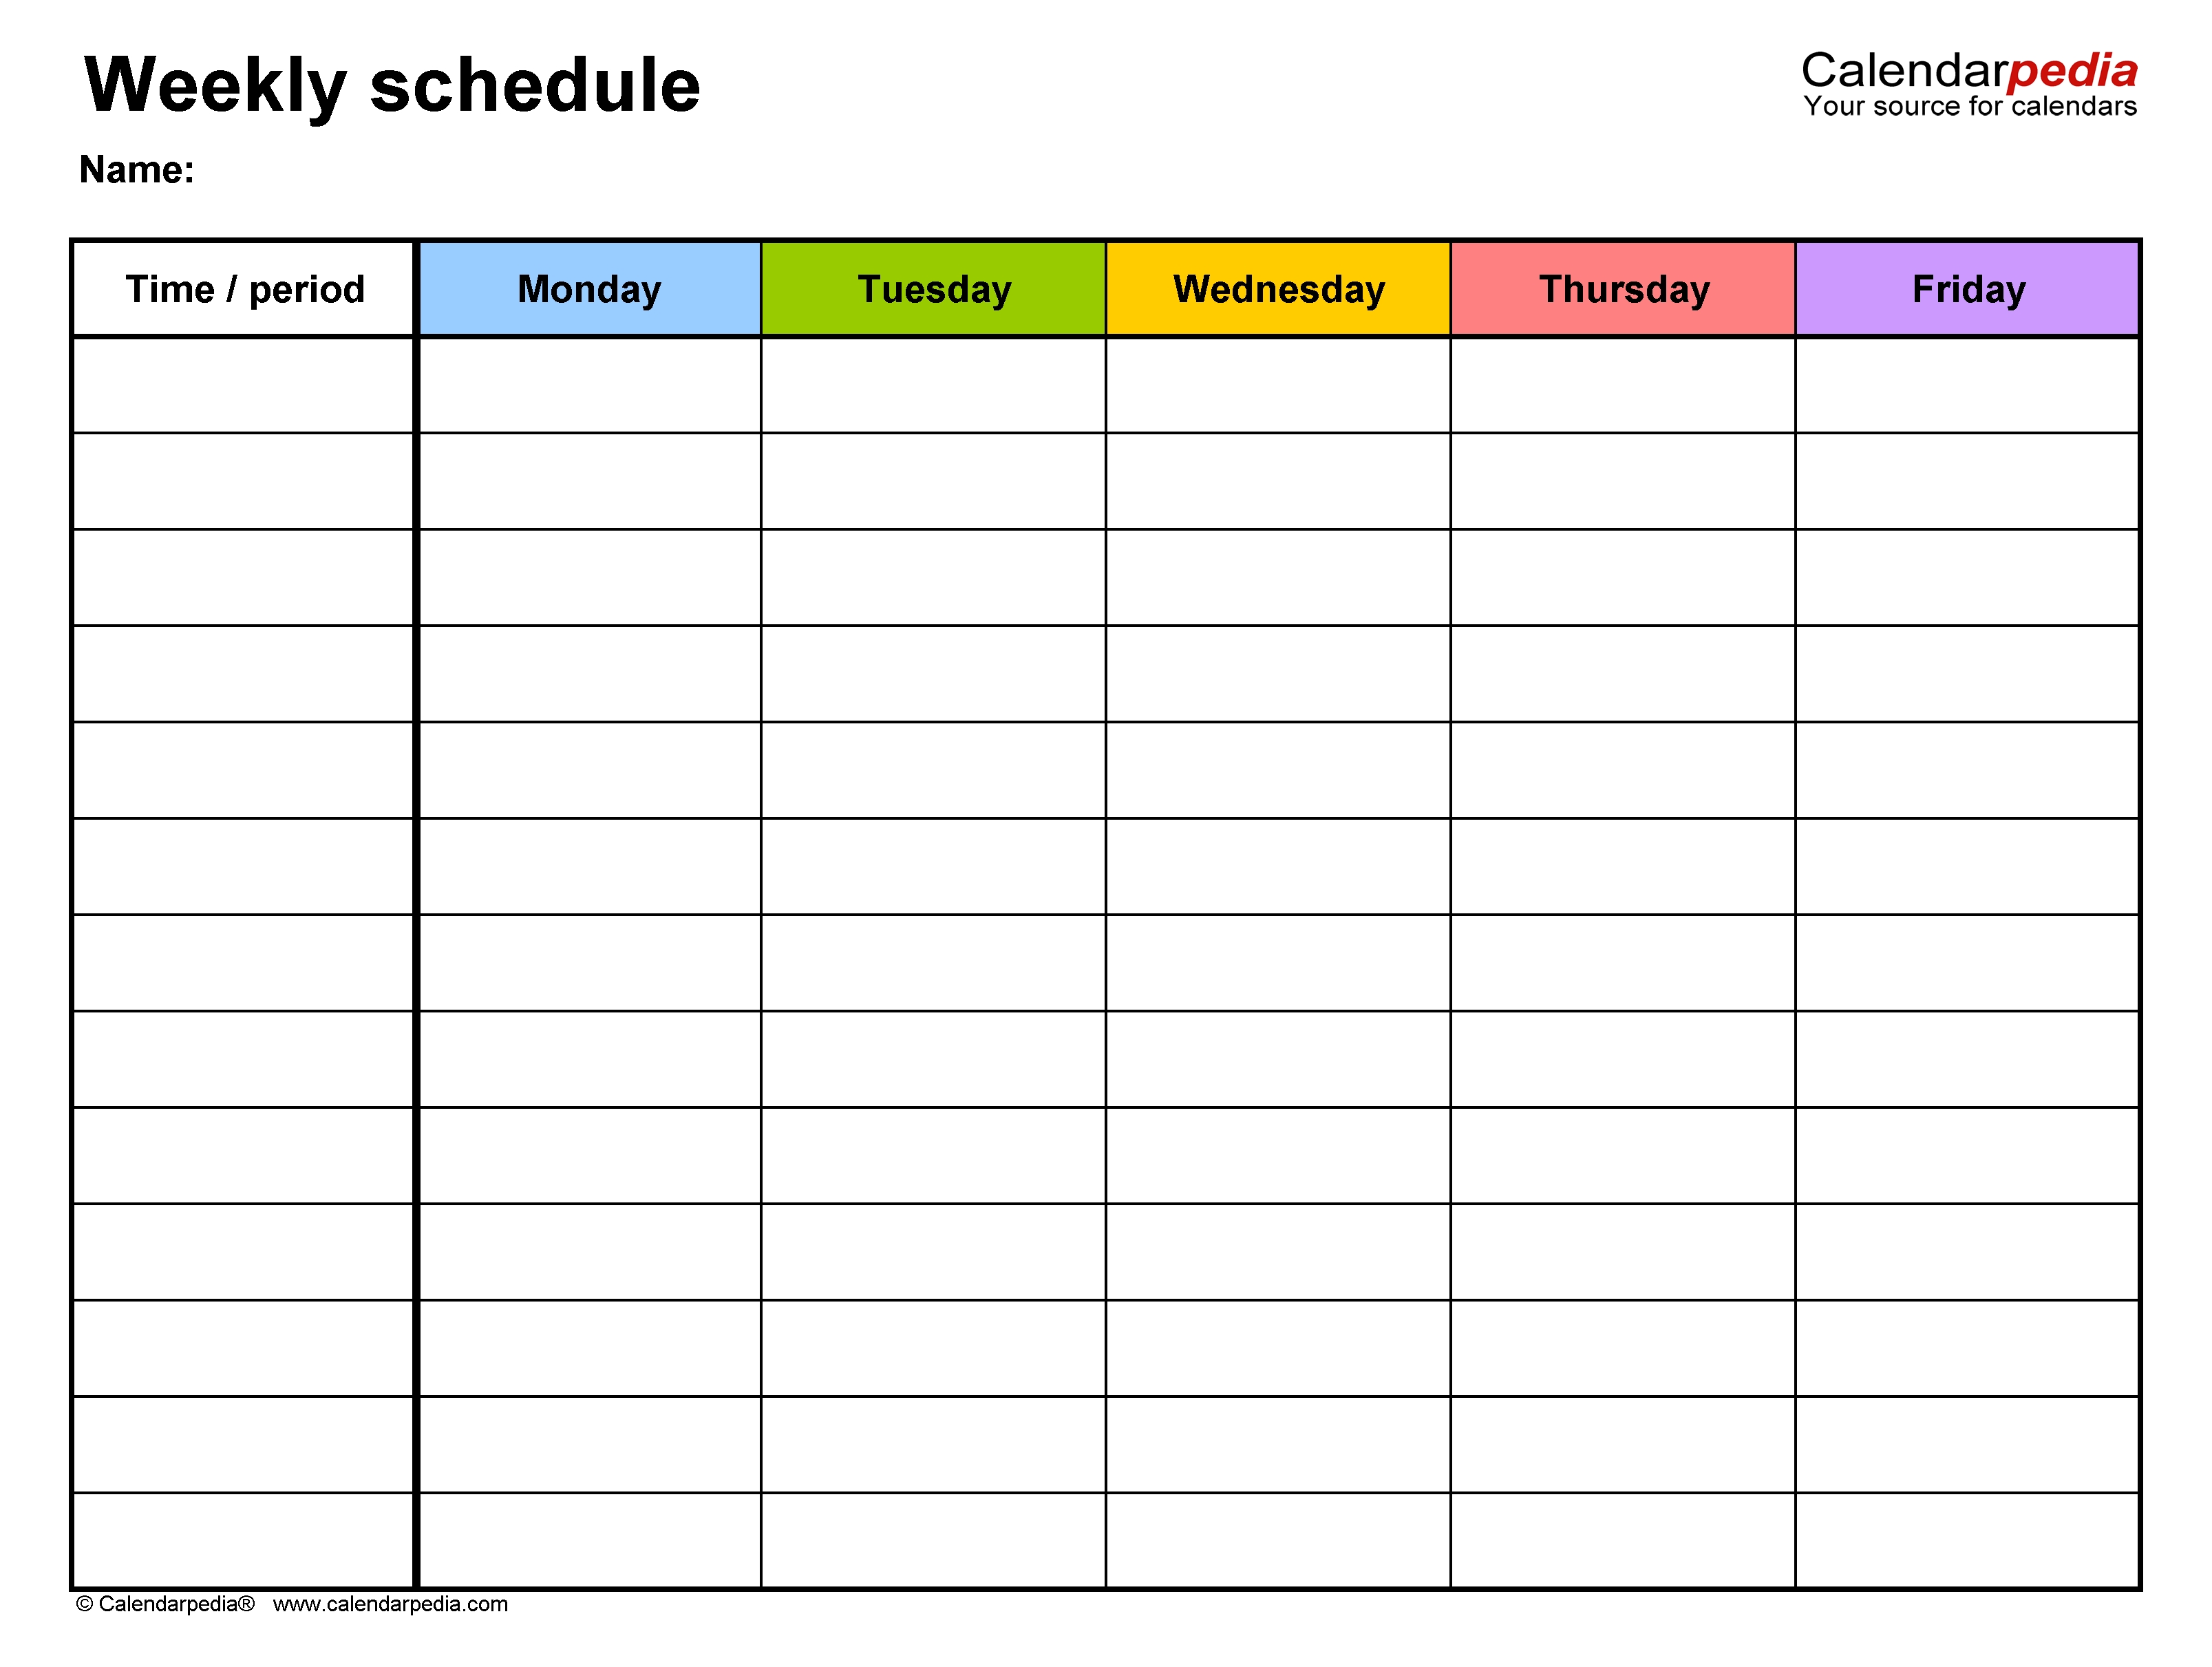 Free Weekly Schedules For Word - 18 Templates 5 Day Hourly Calendar Template